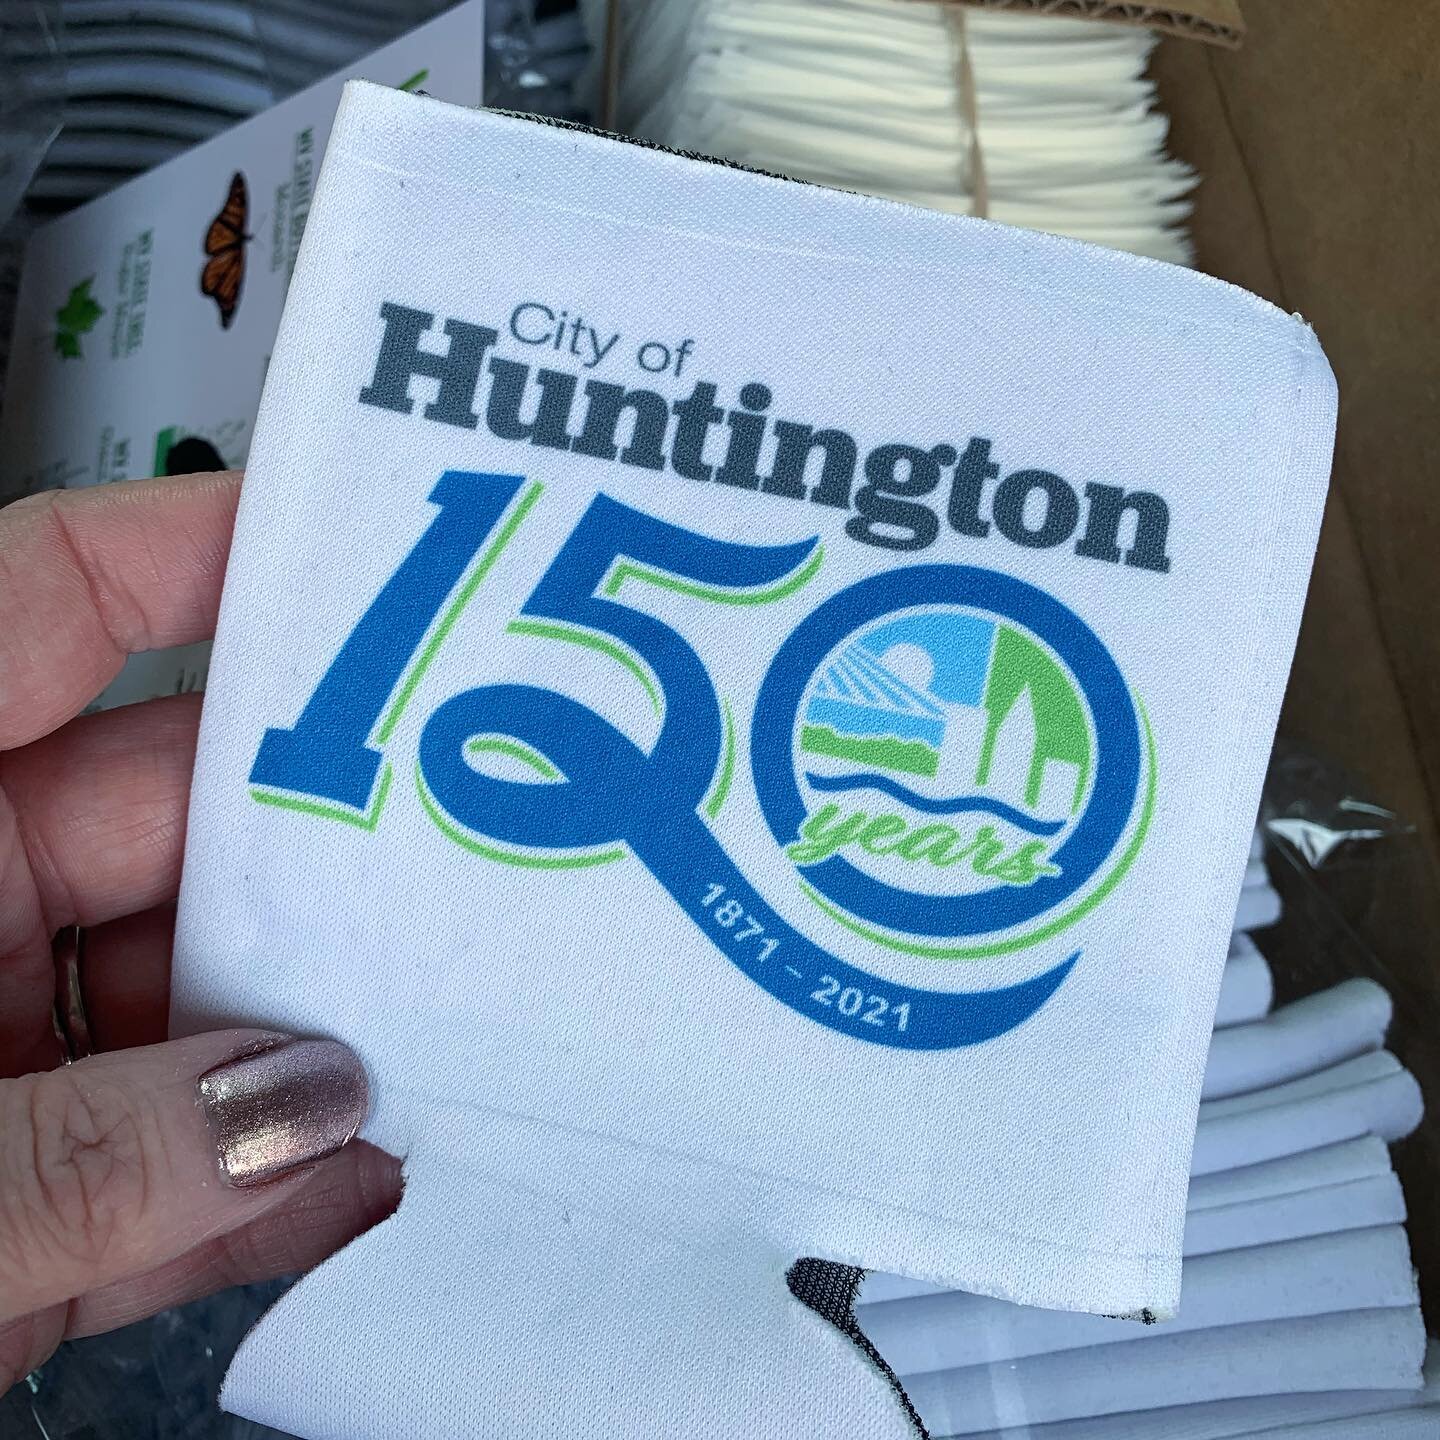 Coming soon to an event near you! #huntington150 #myhuntington #behindthehourglass #sesquicentennial #sneakpeek